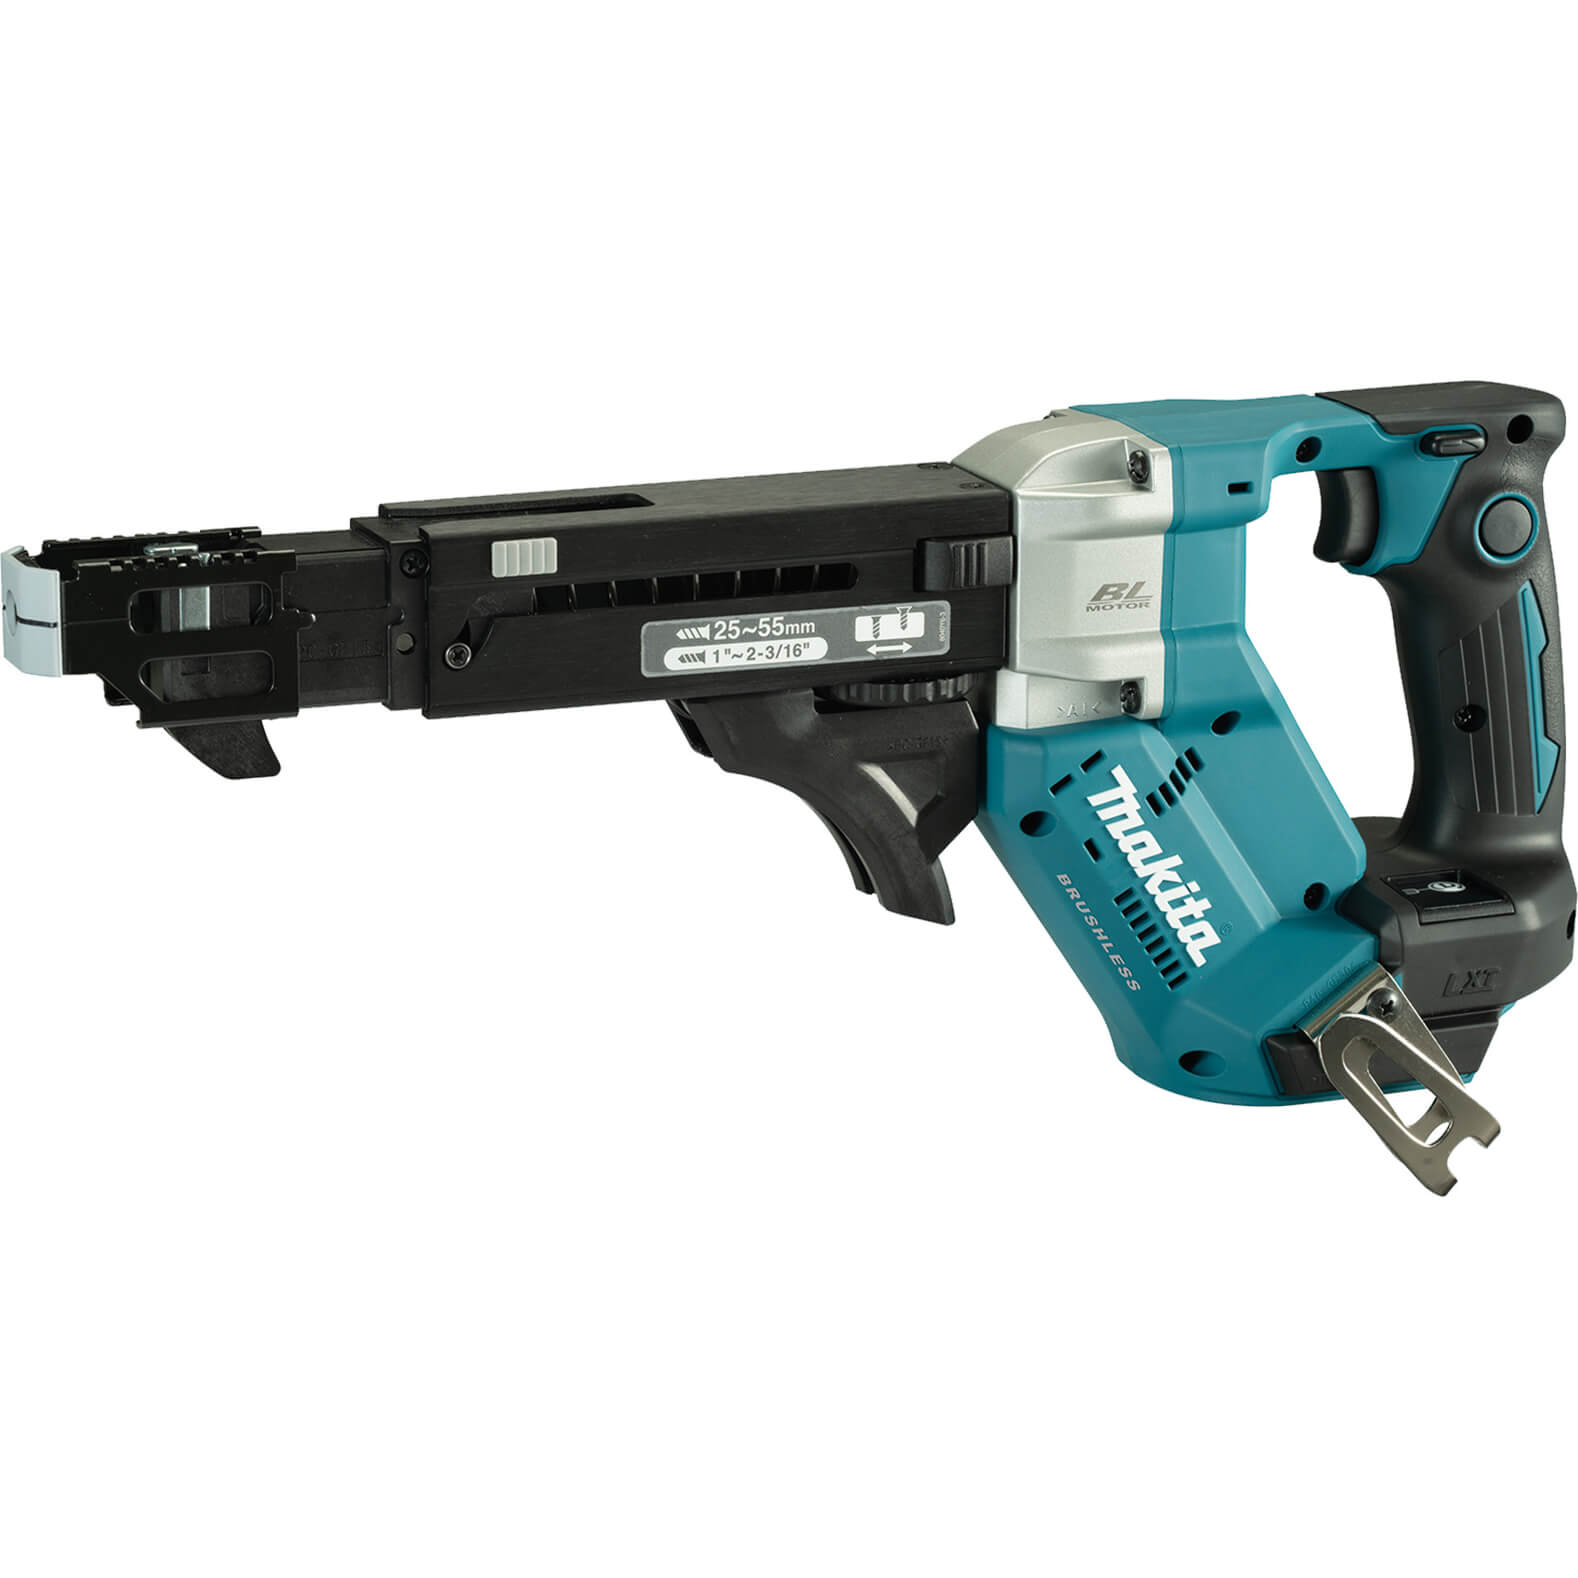 Makita DFR551 18v LXT Cordless Brushless Auto Feed Screwdriver No Batteries No Charger No Case